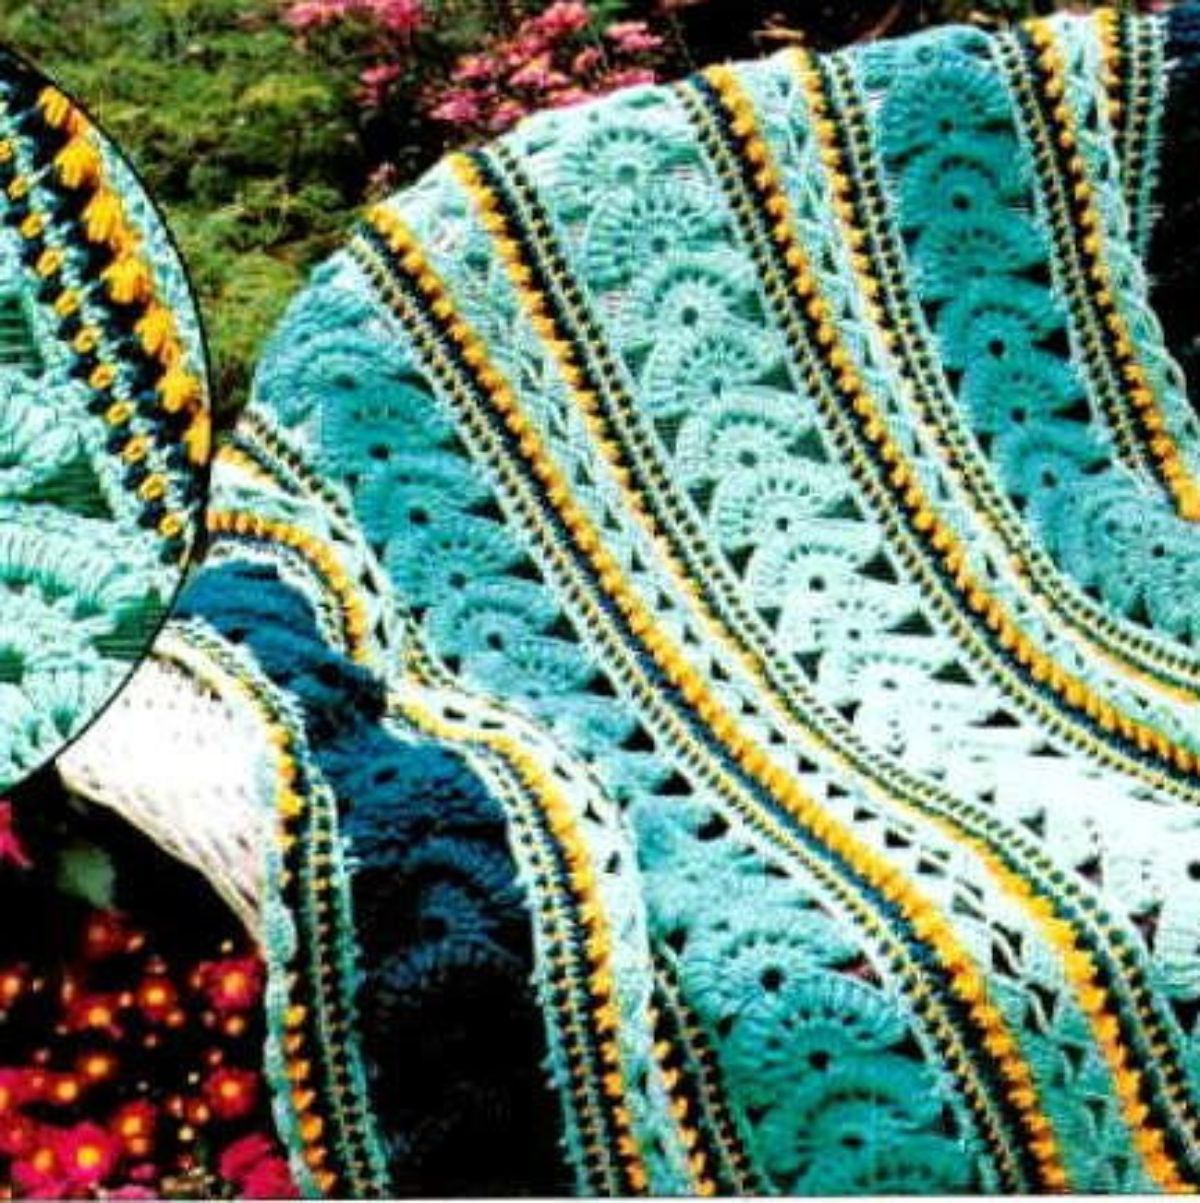 1920s style blue, yellow, and black striped crochet blanket with fan style stitching draped over a chair with grass and flowers behind. 